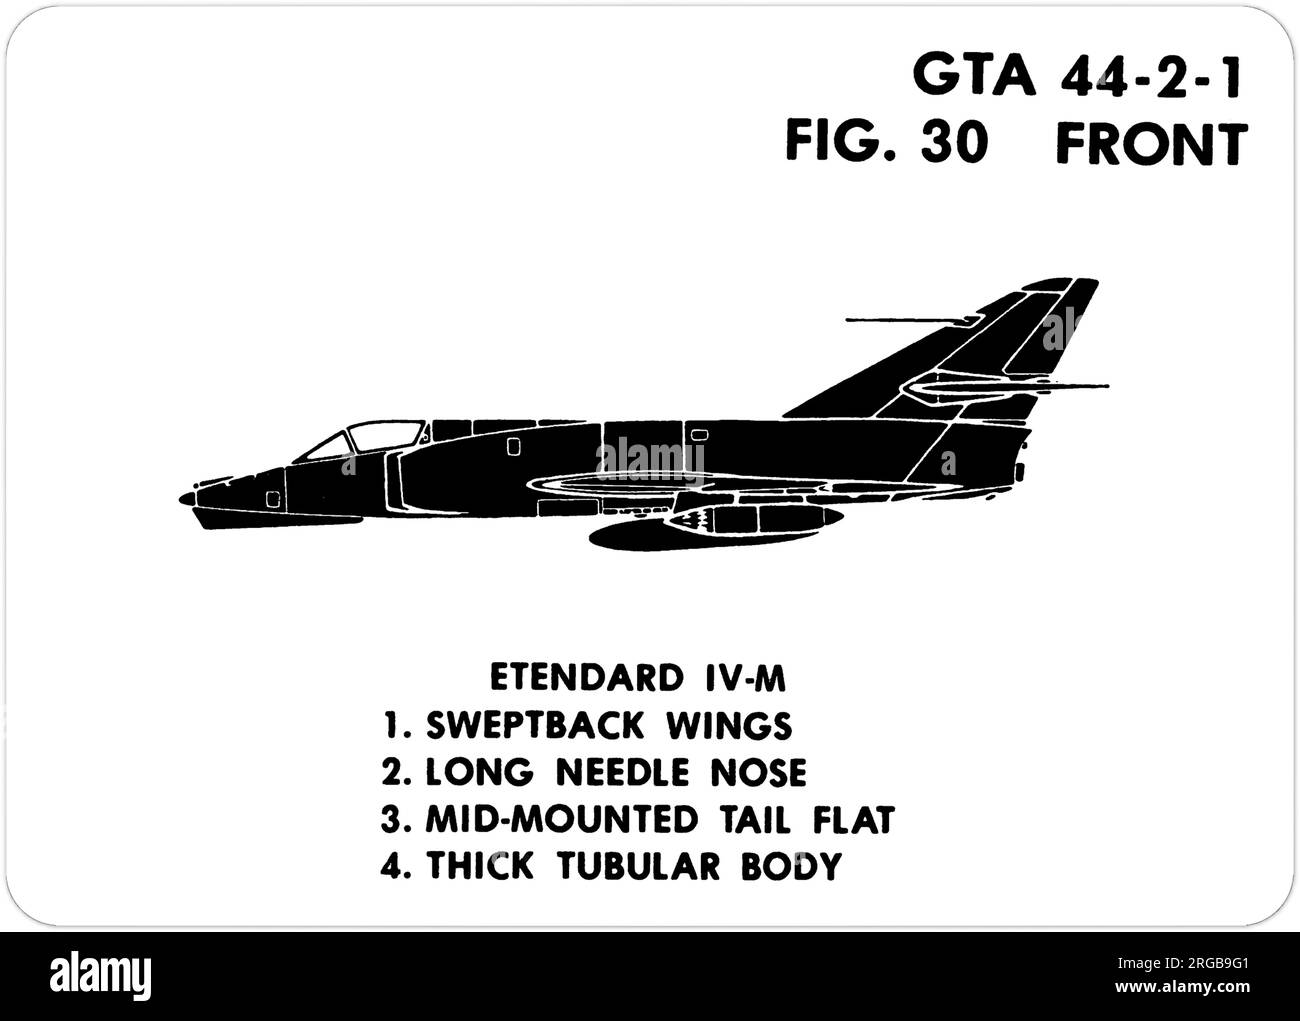 Dassault Etendard IV-M. This is one of the series of Graphics Training Aids (GTA) used by the United States Army to train their personnel to recognize friendly and hostile aircraft. This particular set, GTA 44-2-1, was issued in July1977. The set features aircraft from: Canada, Italy, United Kingdom, United States, and the USSR. Stock Photo